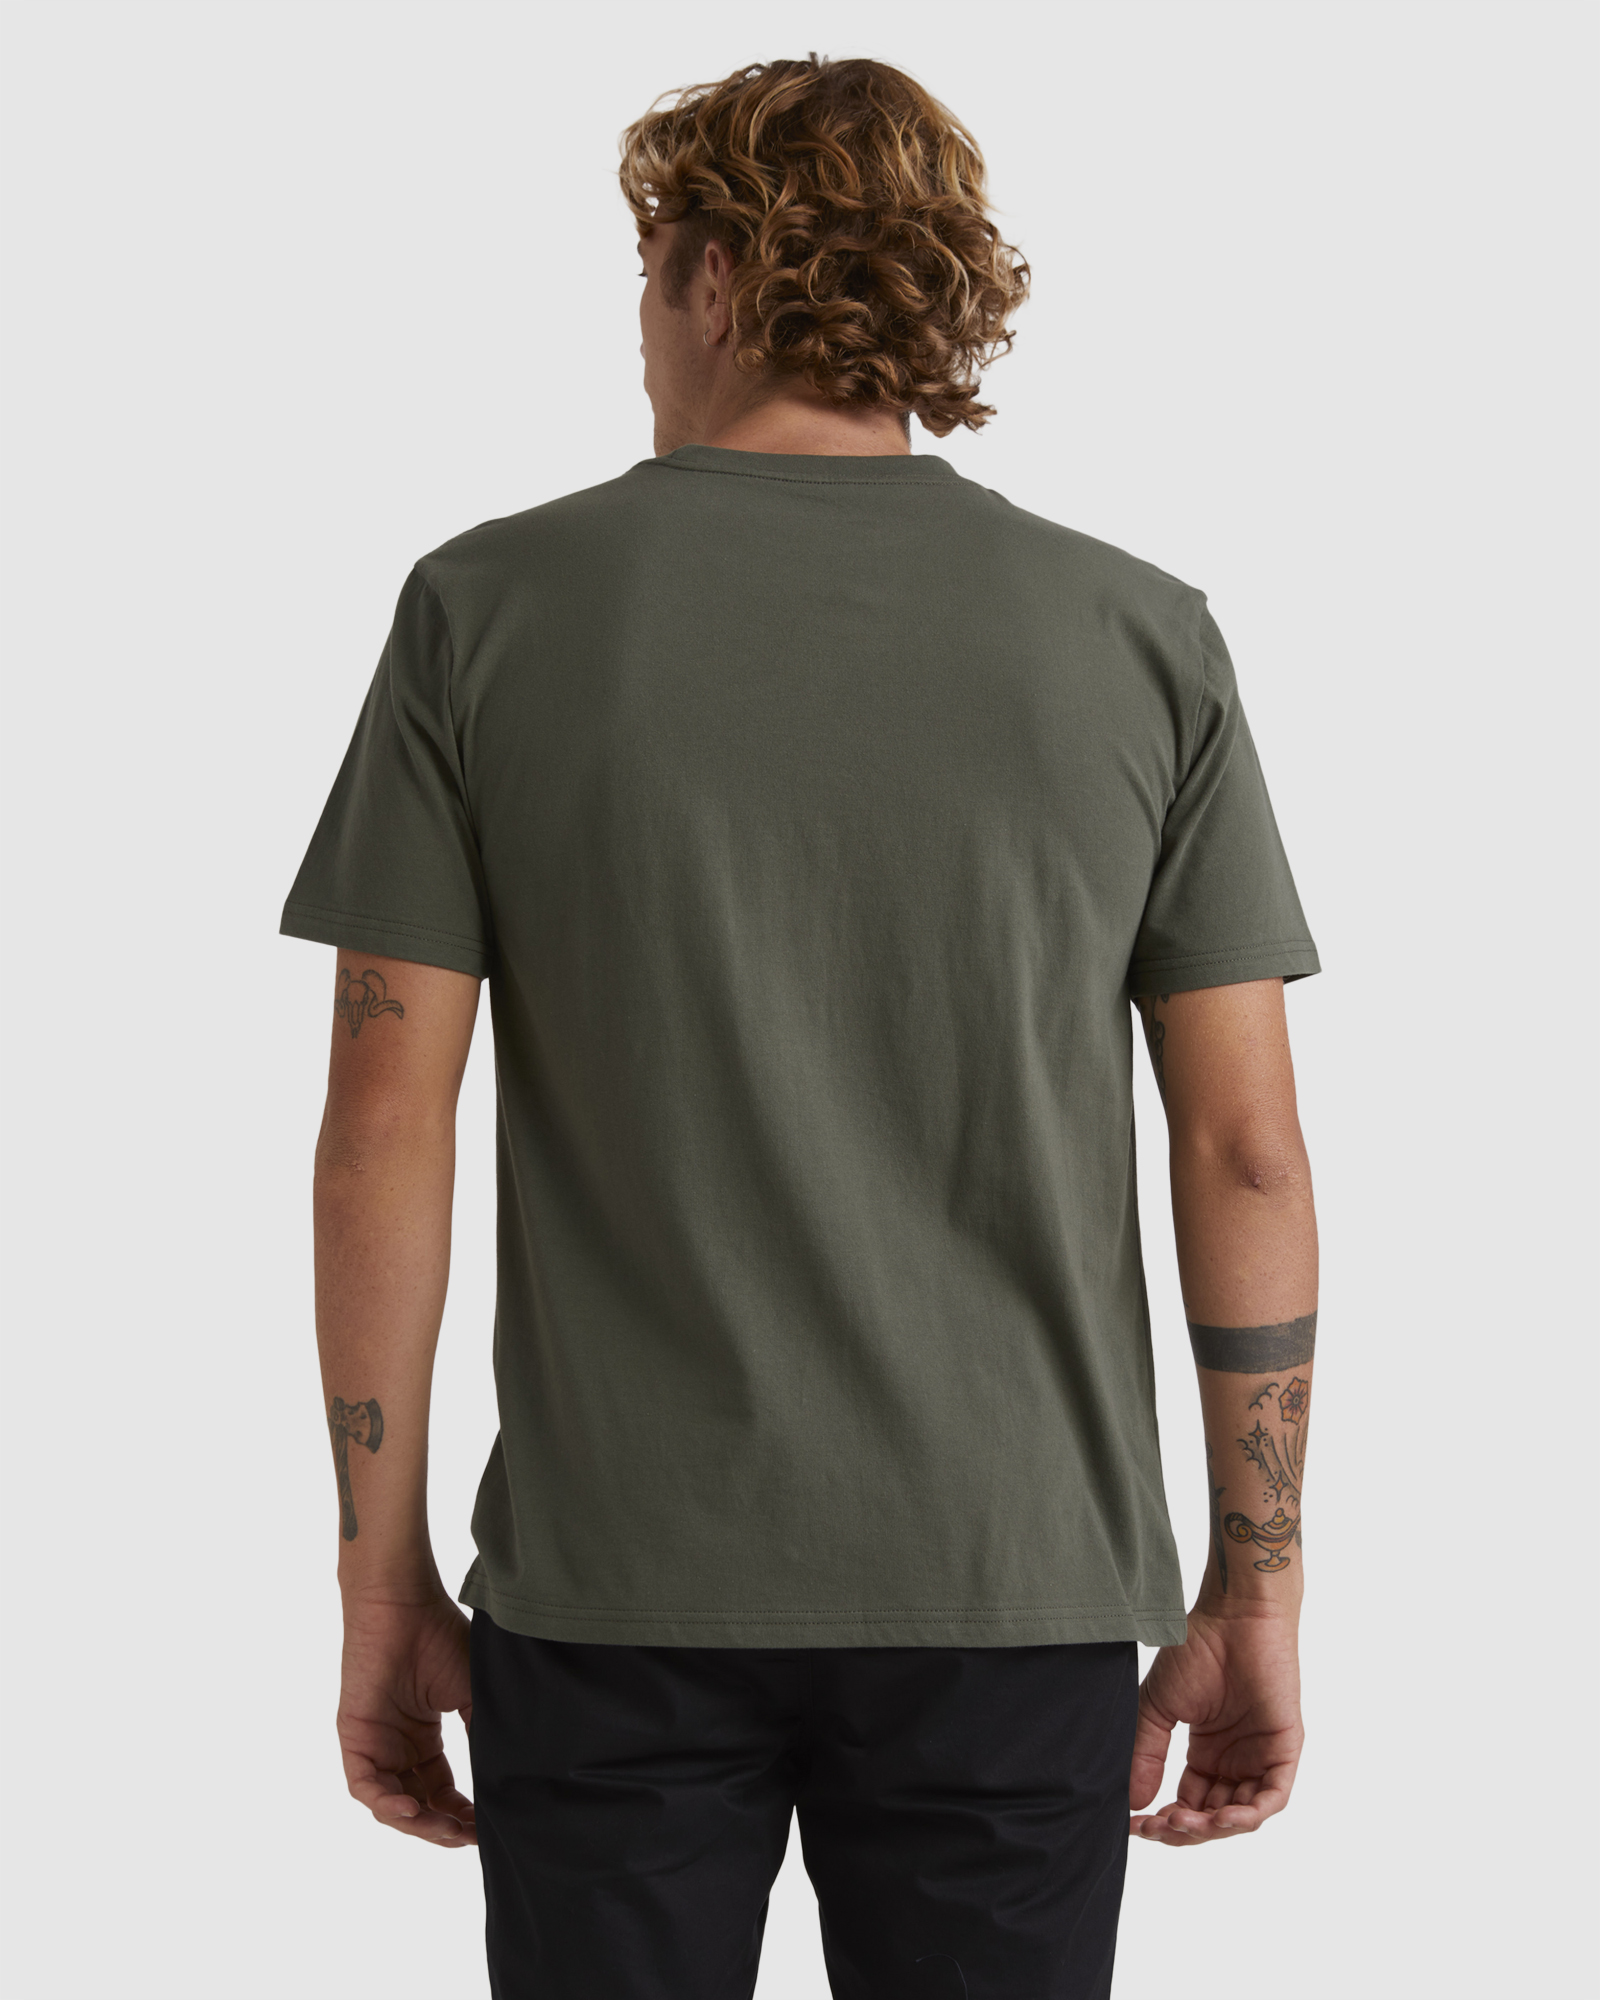 Quiksilver Mens Omni Check Turn Tee - Climbing Ivy | SurfStitch